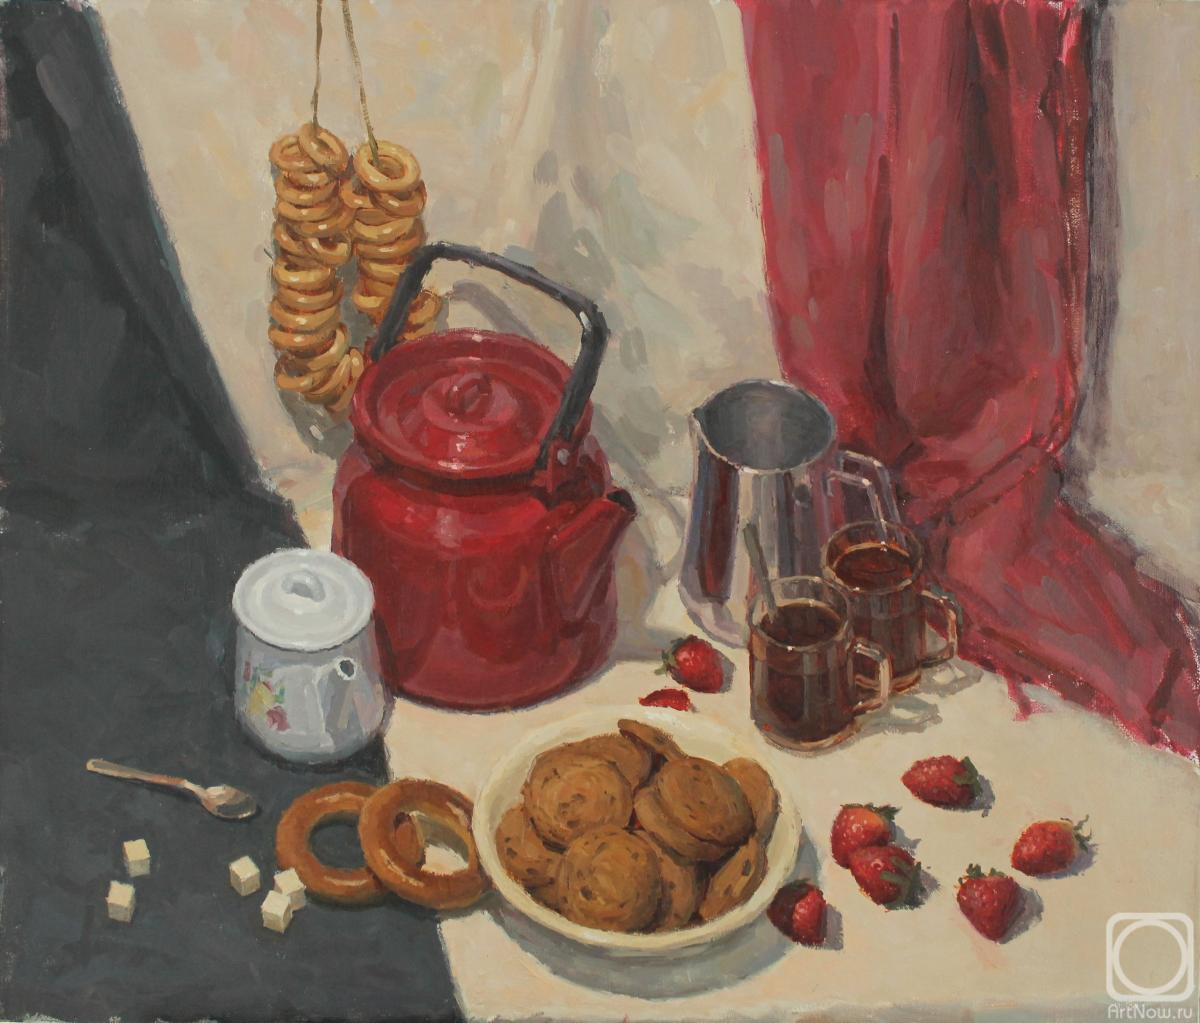 Sheyko Filipp. Still life with a red teapot